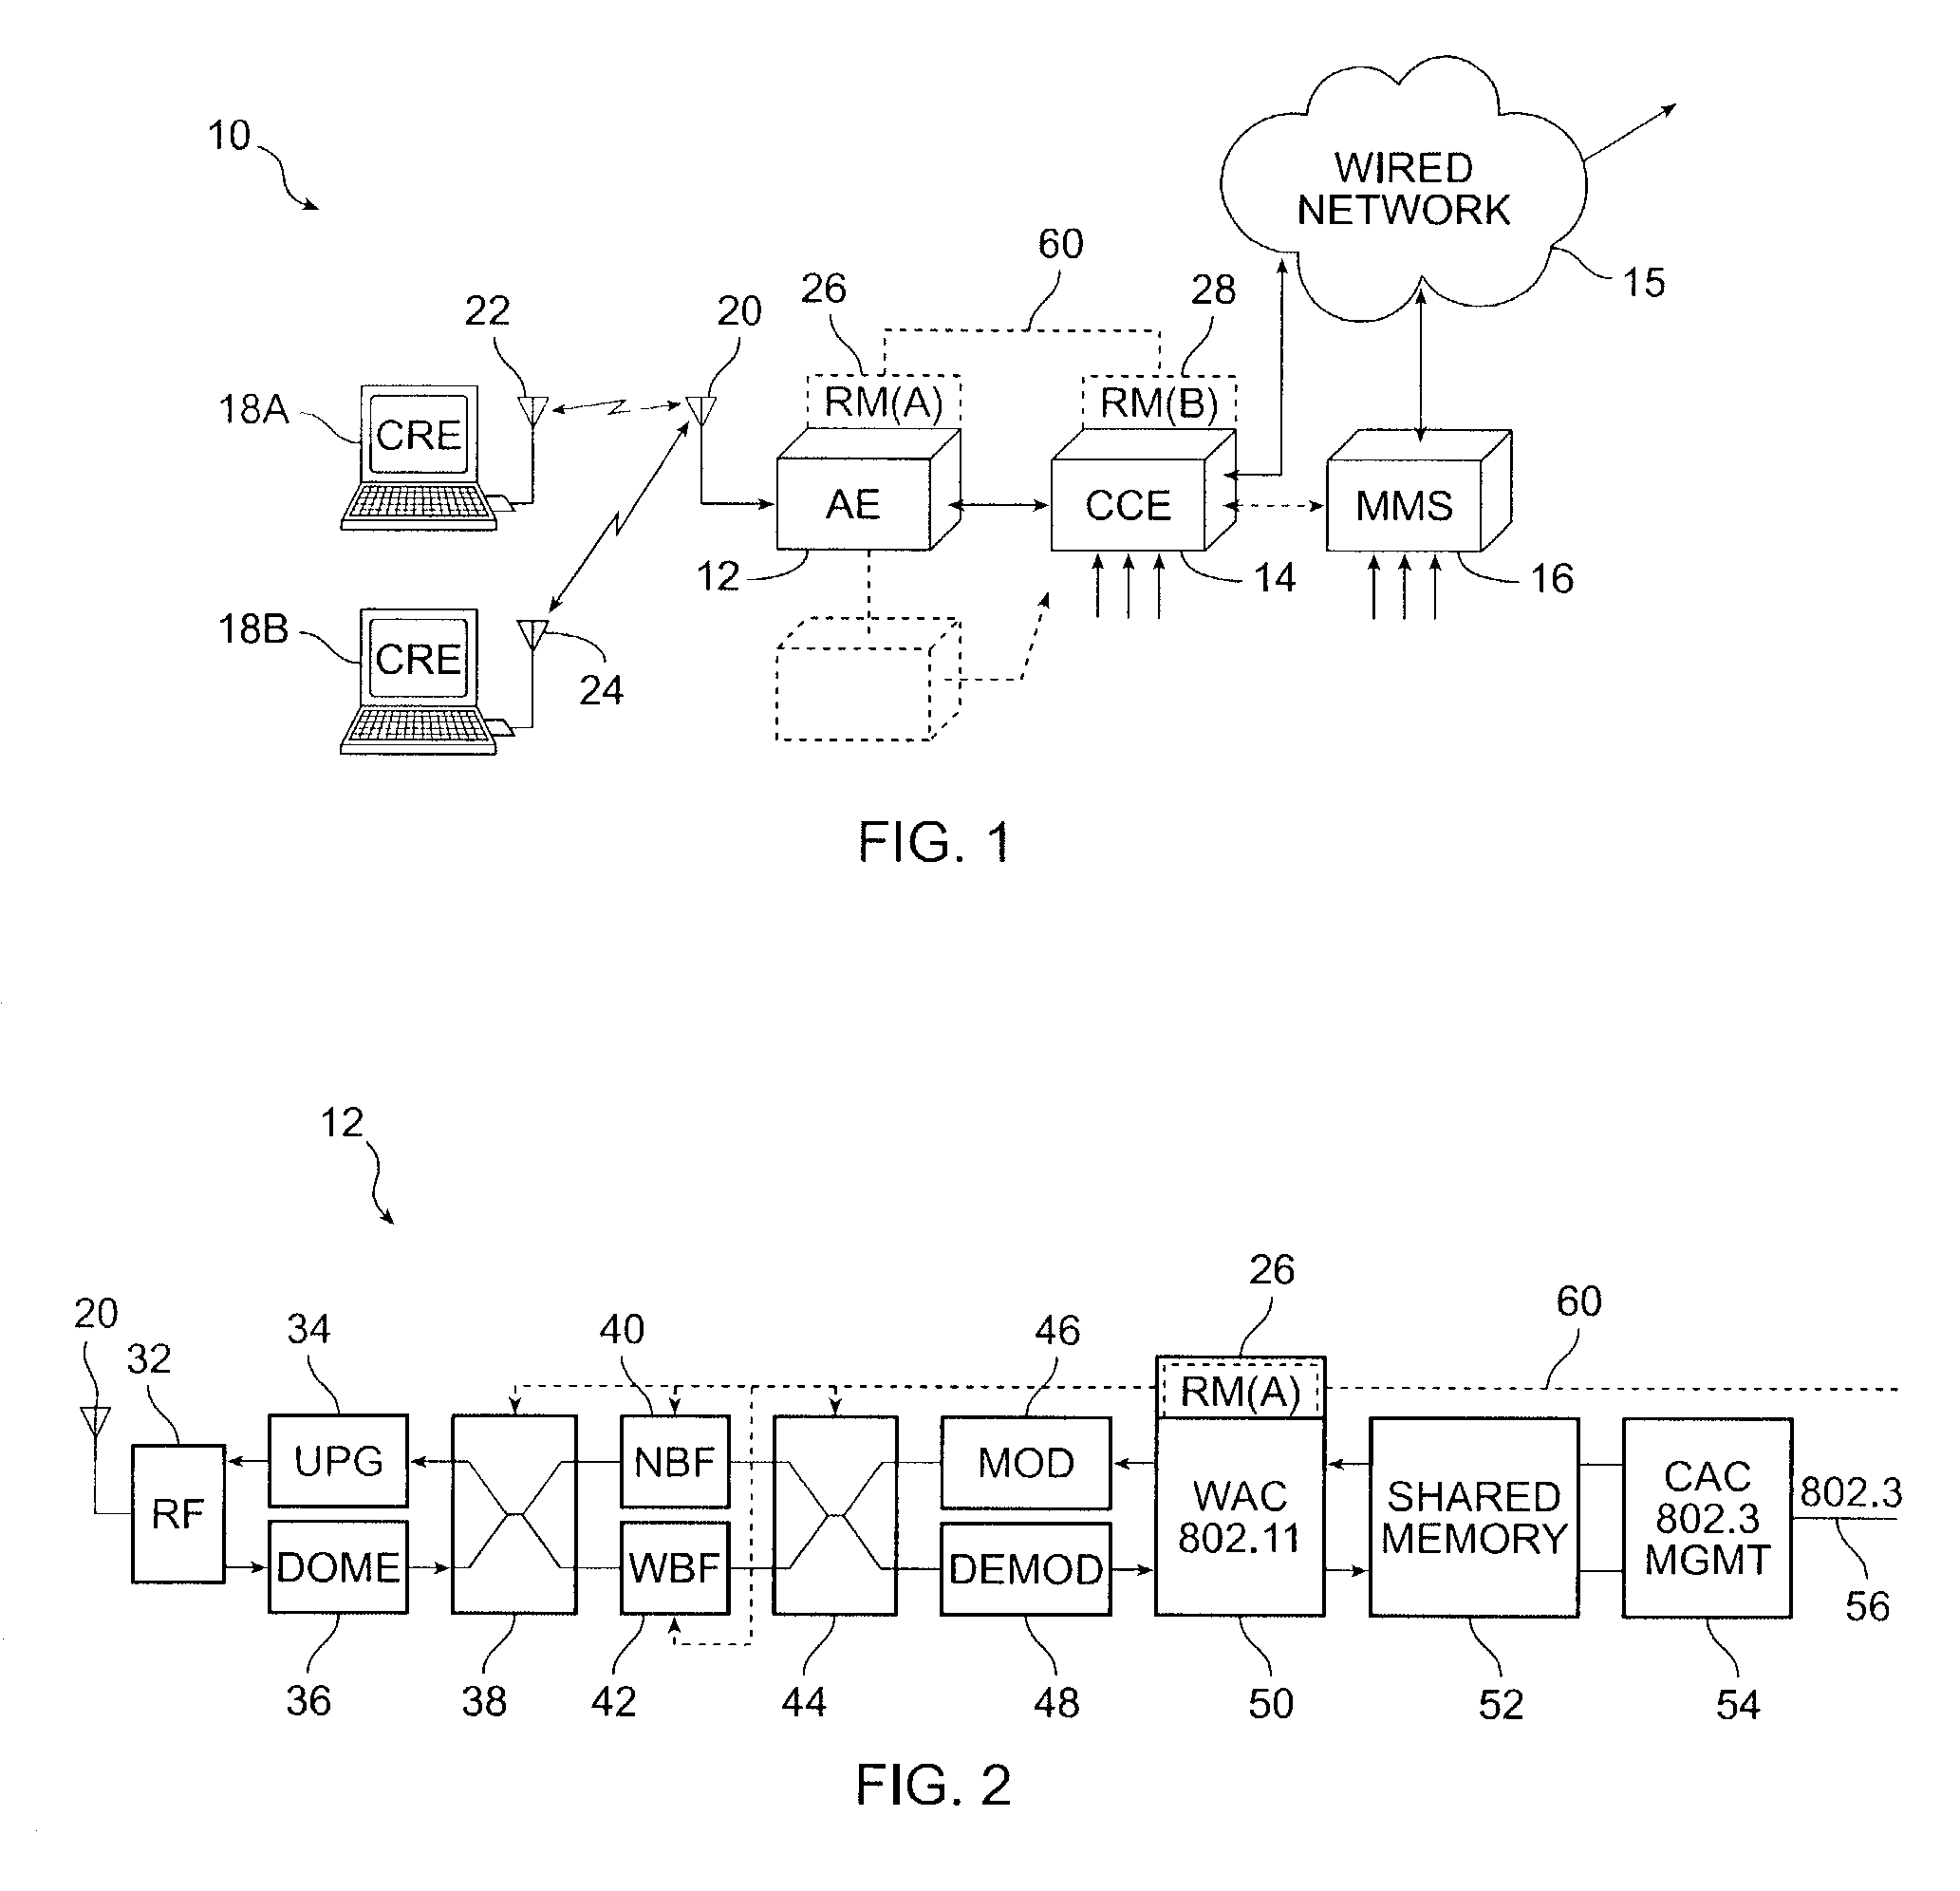 Method and system for dynamically assigning channels across multiple radios in a wireless LAN